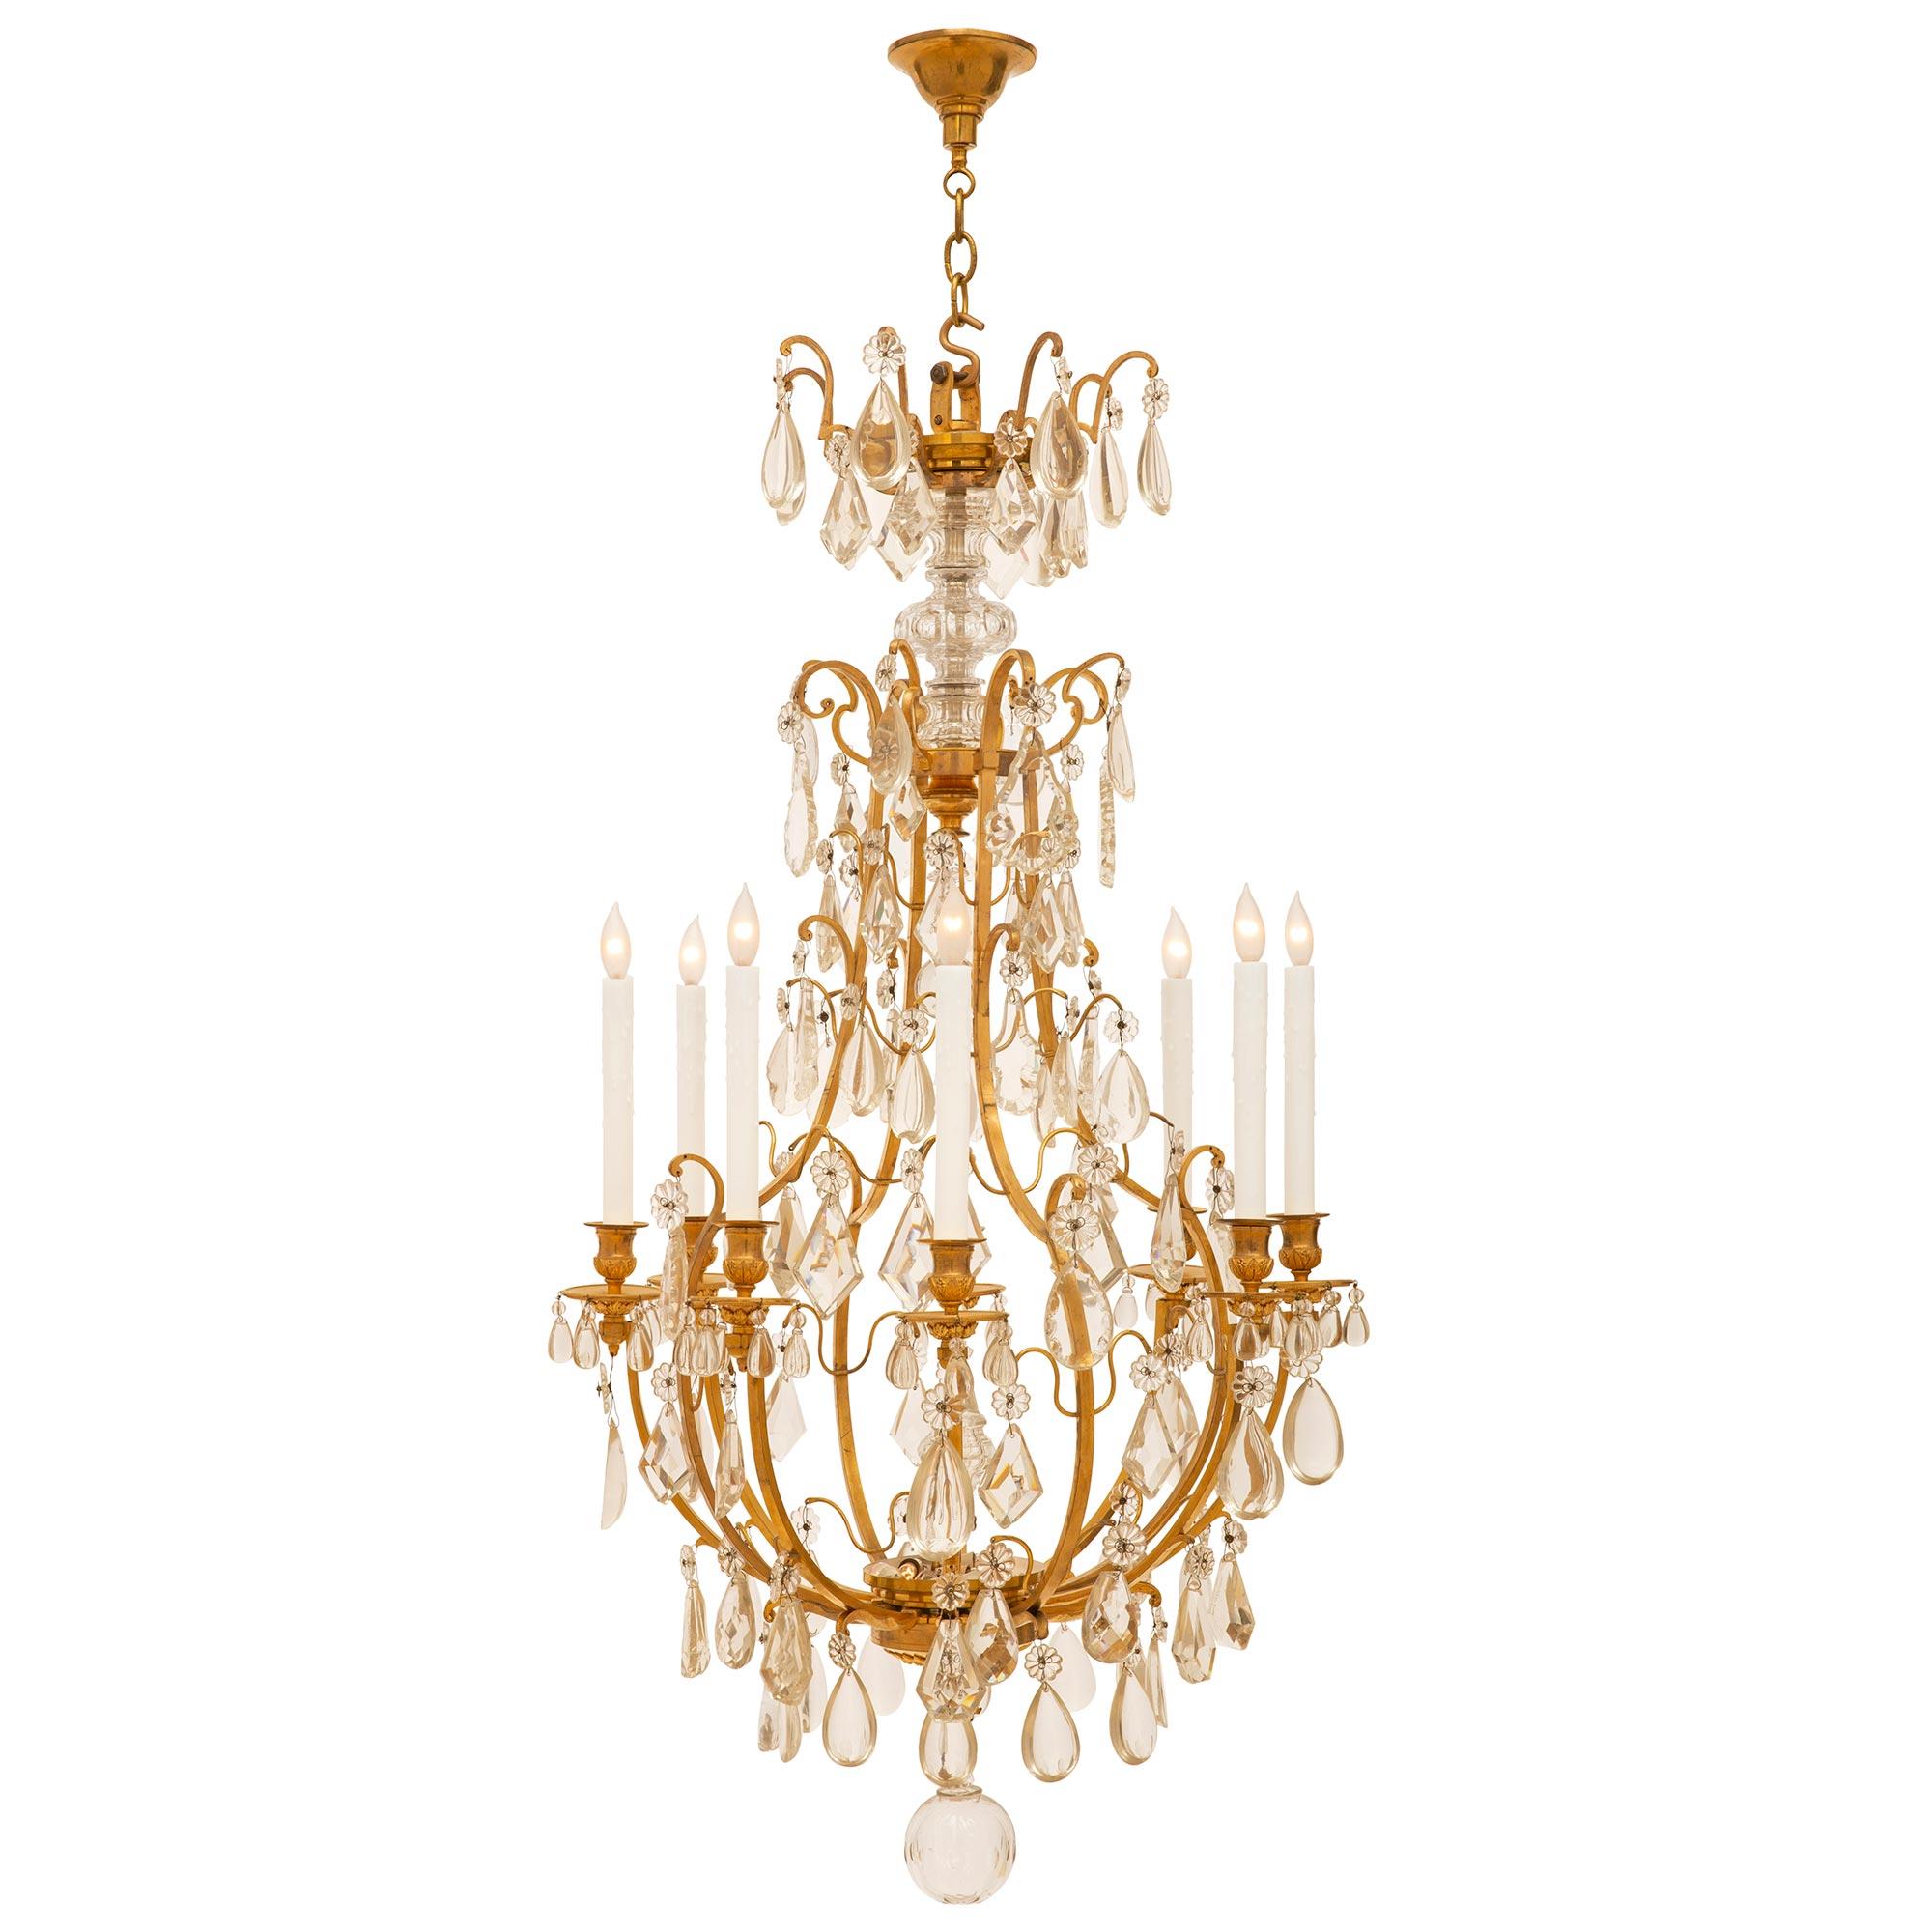 A stunning French 19th century Louis XV st. ormolu and Baccarat crystal eight light chandelier. A crystal ball hangs below the ormolu base with acanthus leaf design and inverted finial. Above is the impressive ormolu open cage adorned with cut